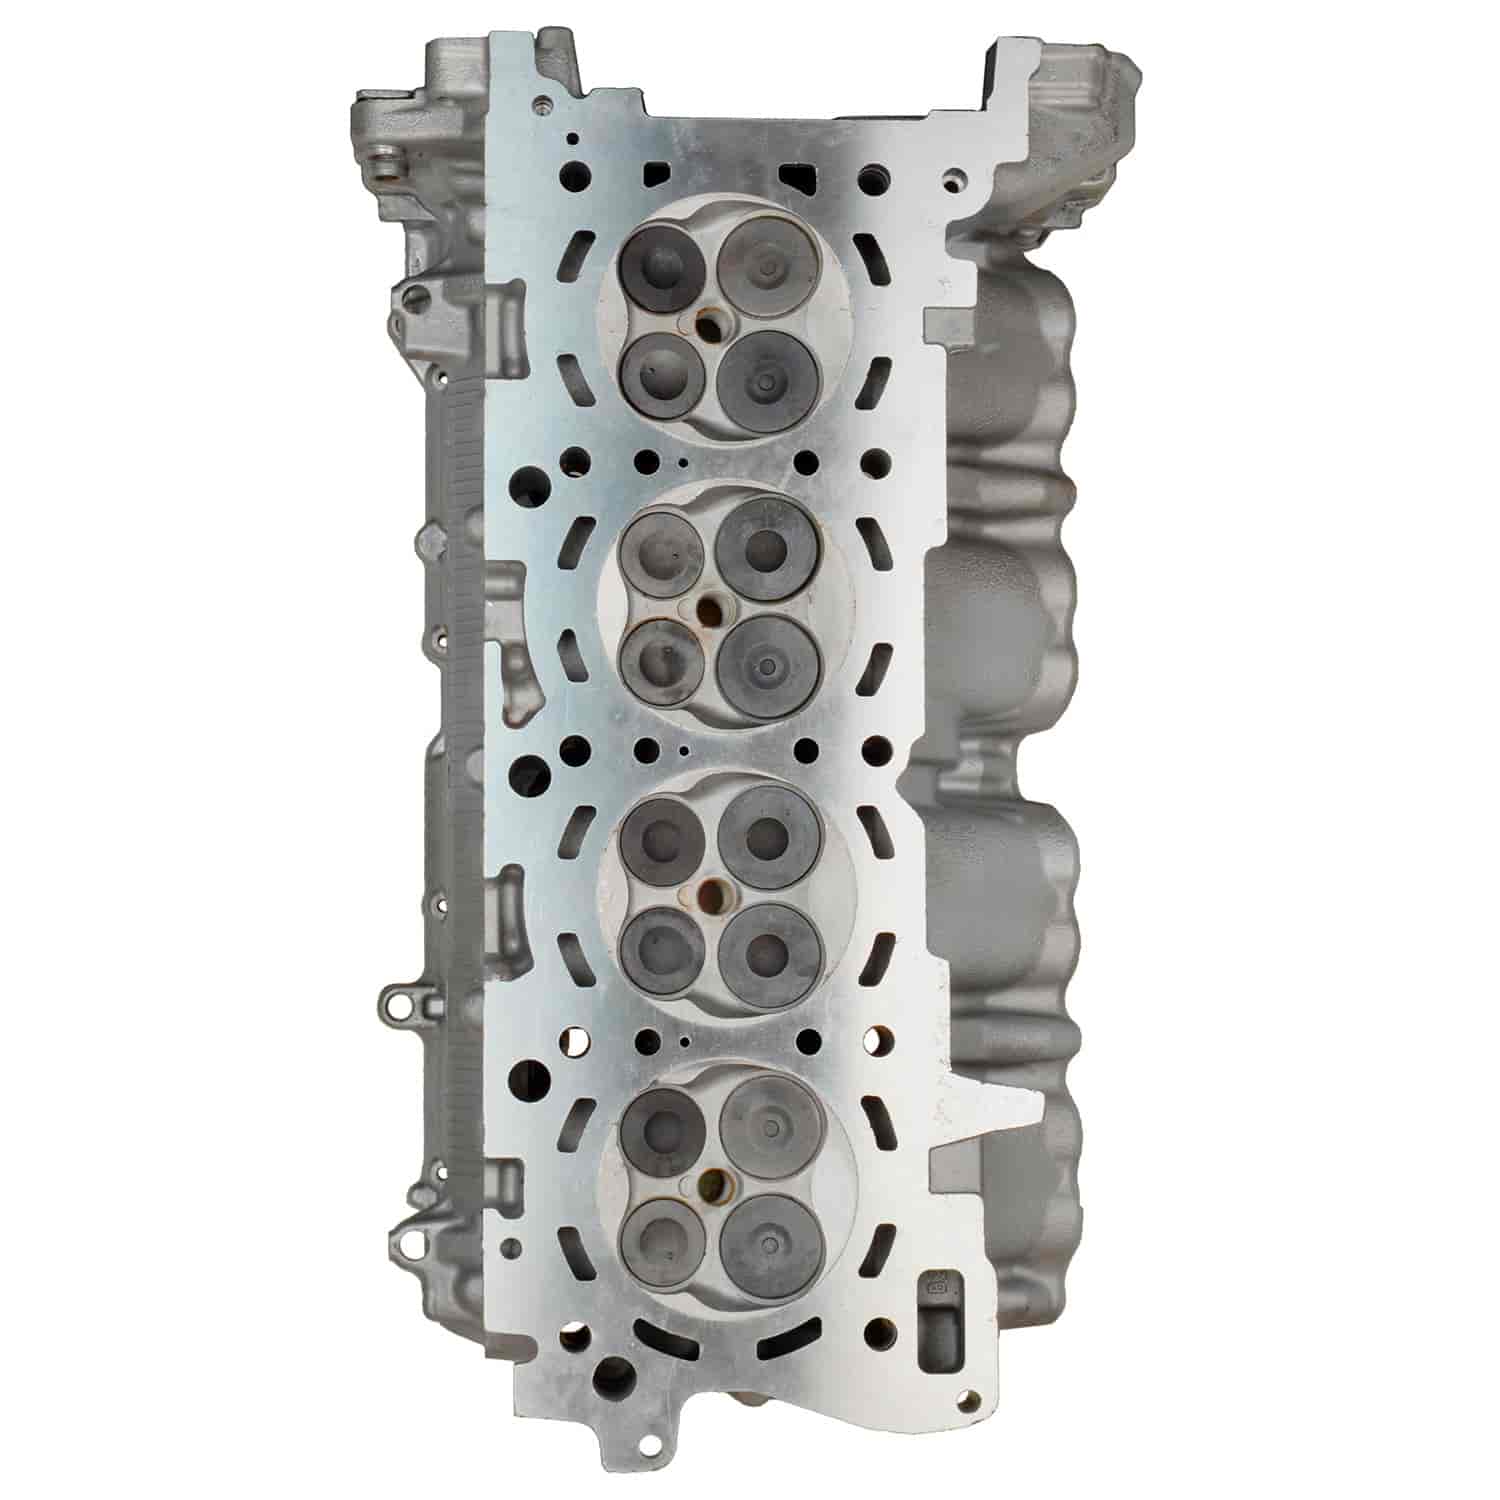 Remanufactured Cylinder Head for 2007-2015 Toyota/Lexus with 5.7L V8 3URFE